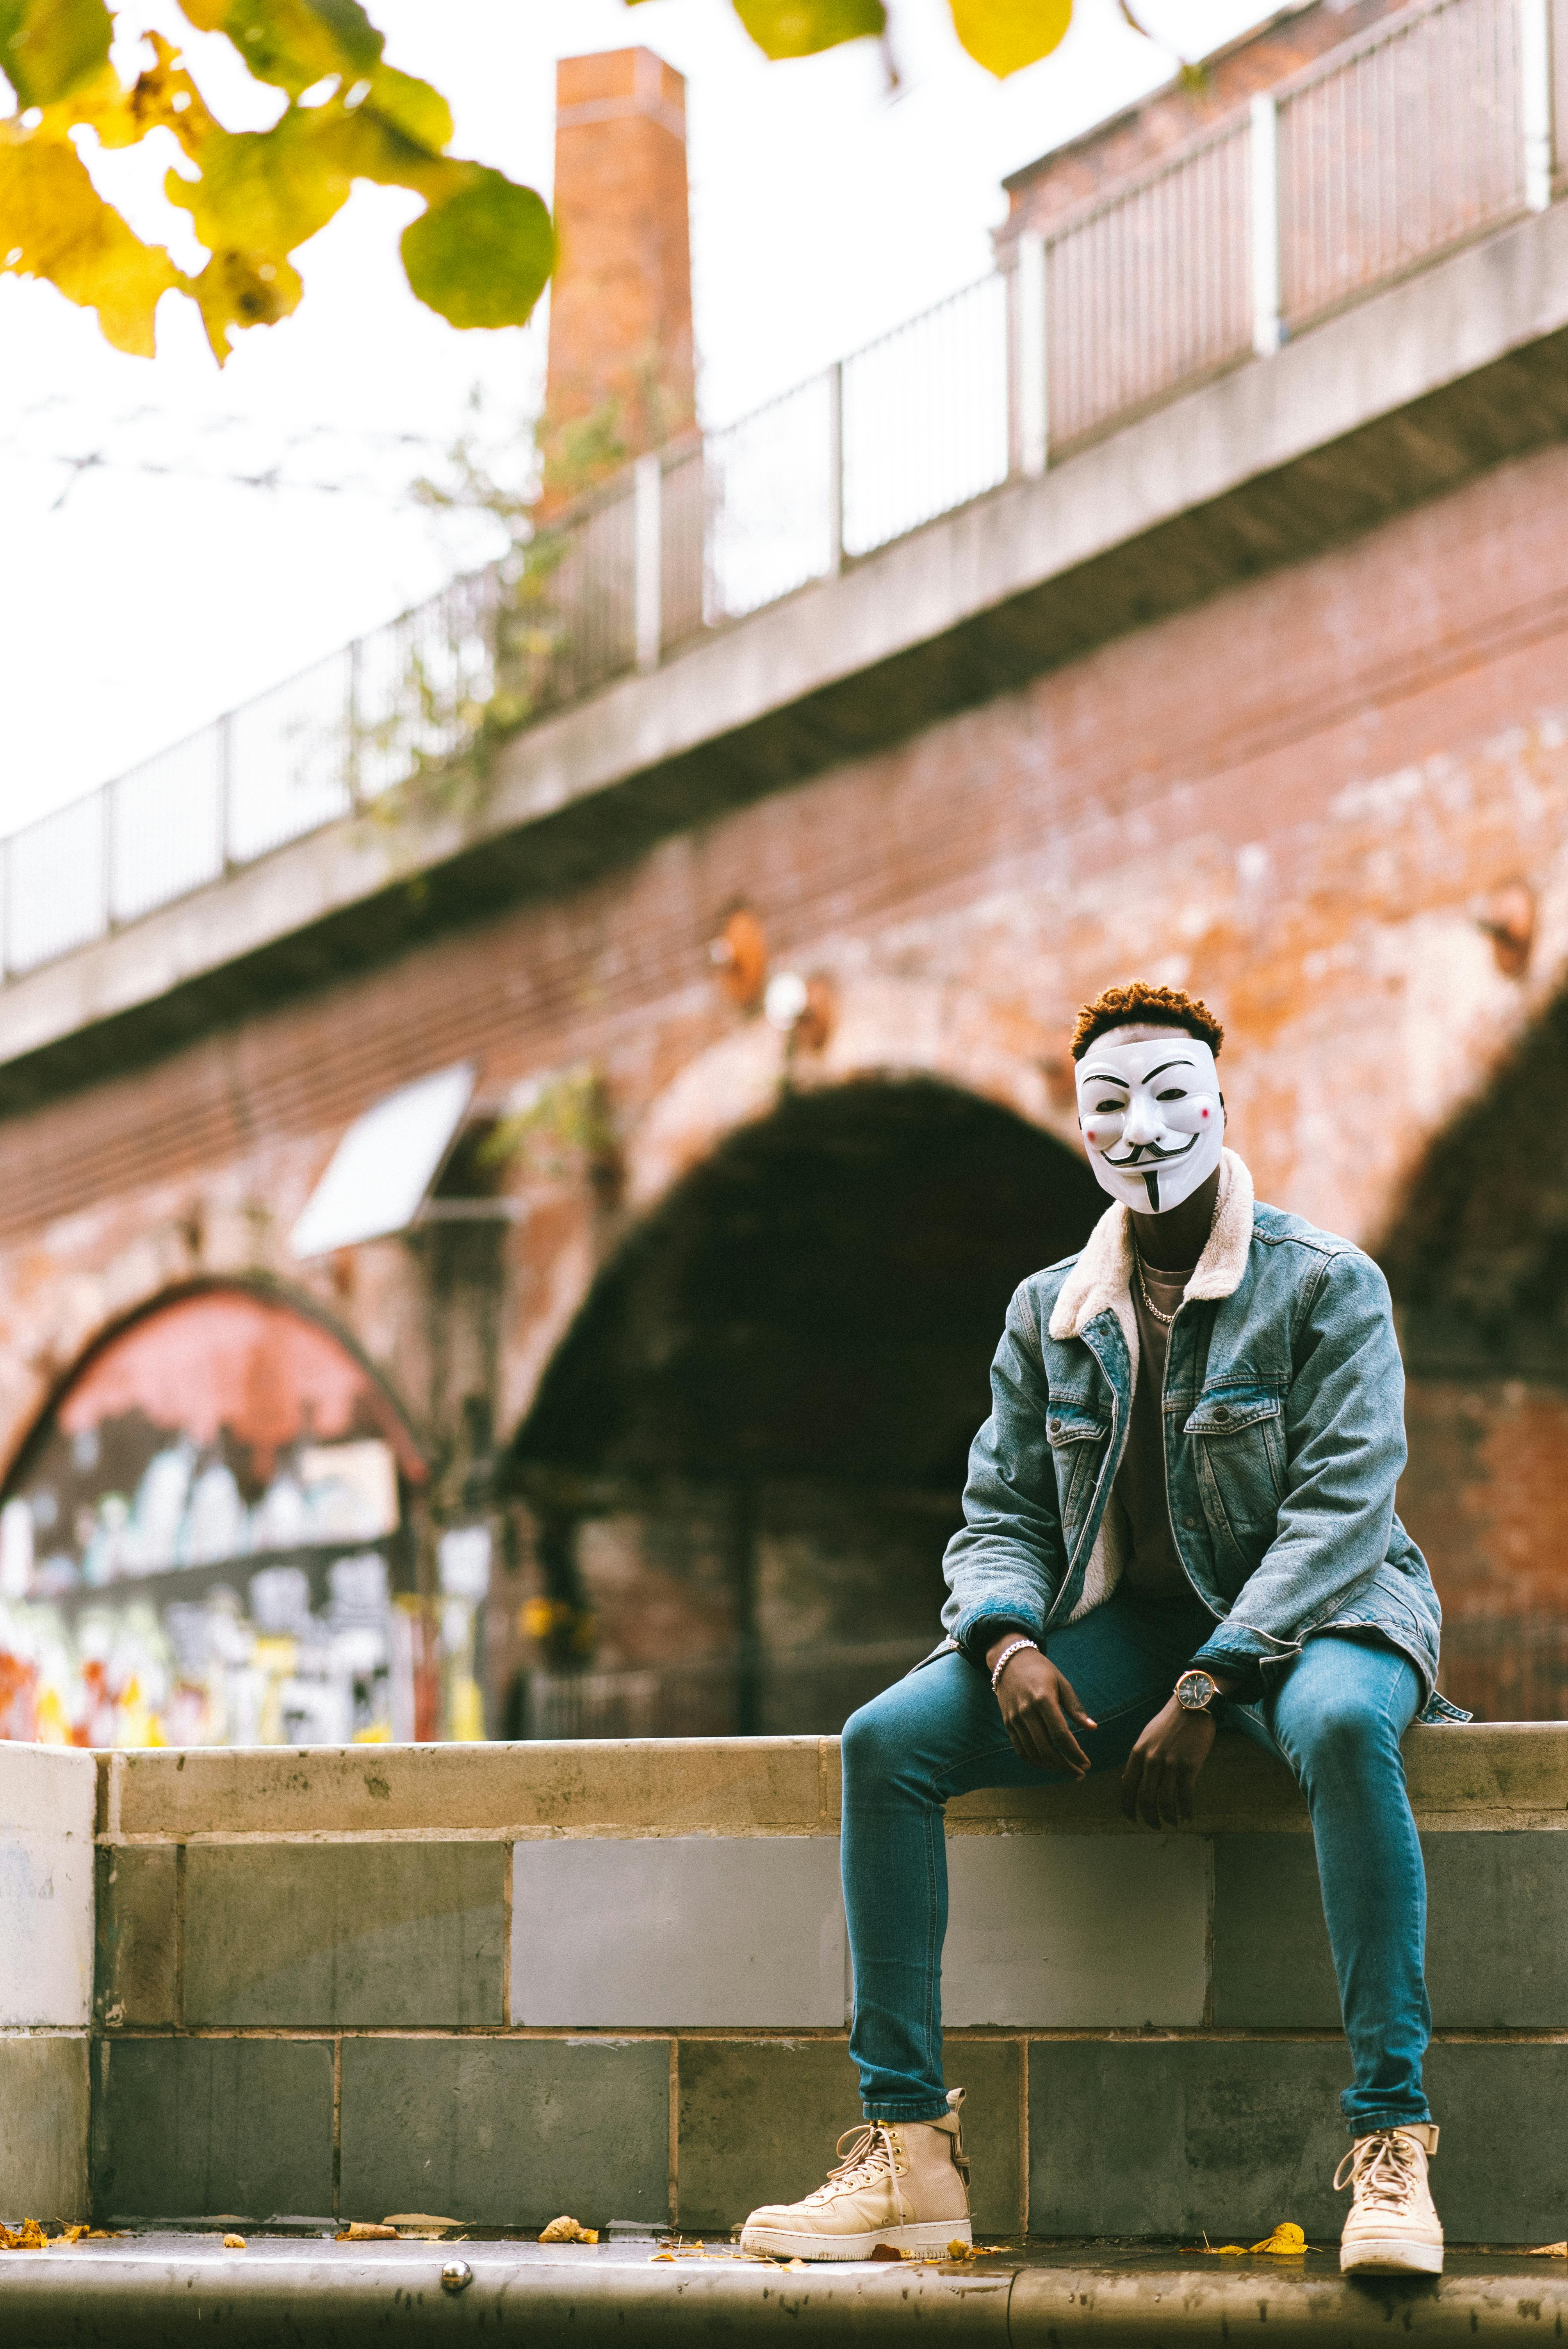 Anonymous Mask Photos, Download The BEST Free Anonymous Mask Stock